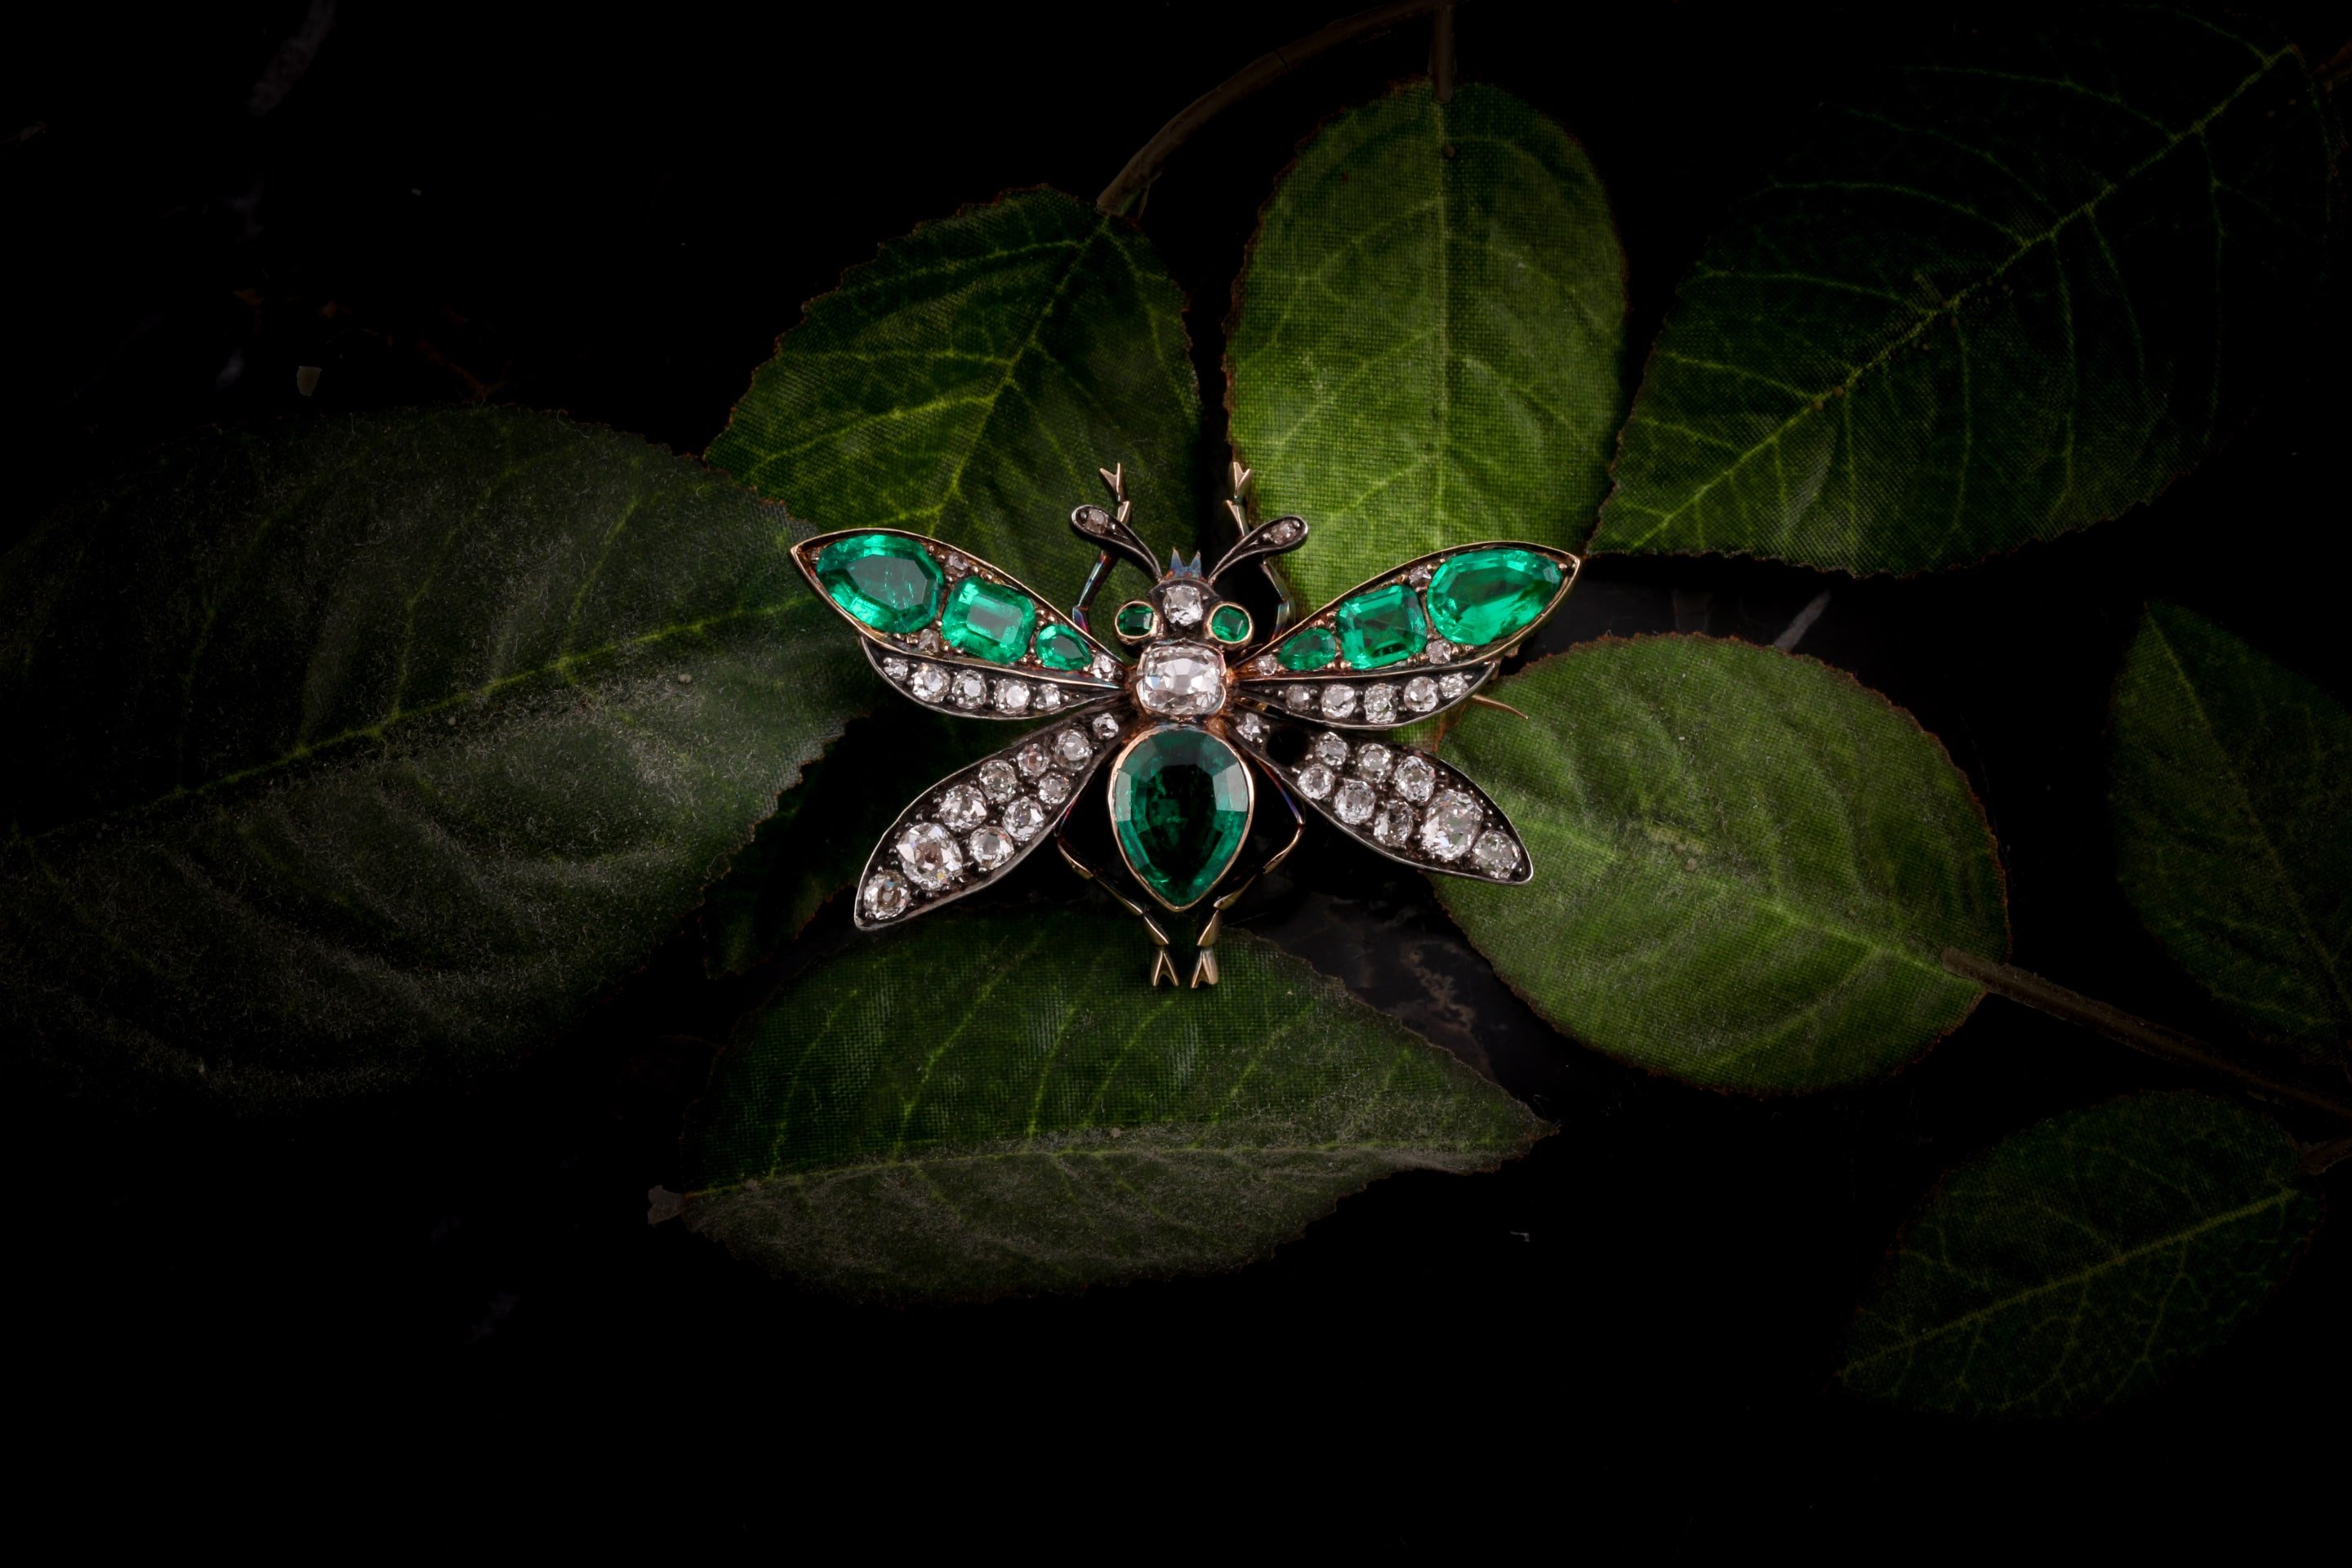 A Victorian diamond and emerald insect brooch in the form of a fly